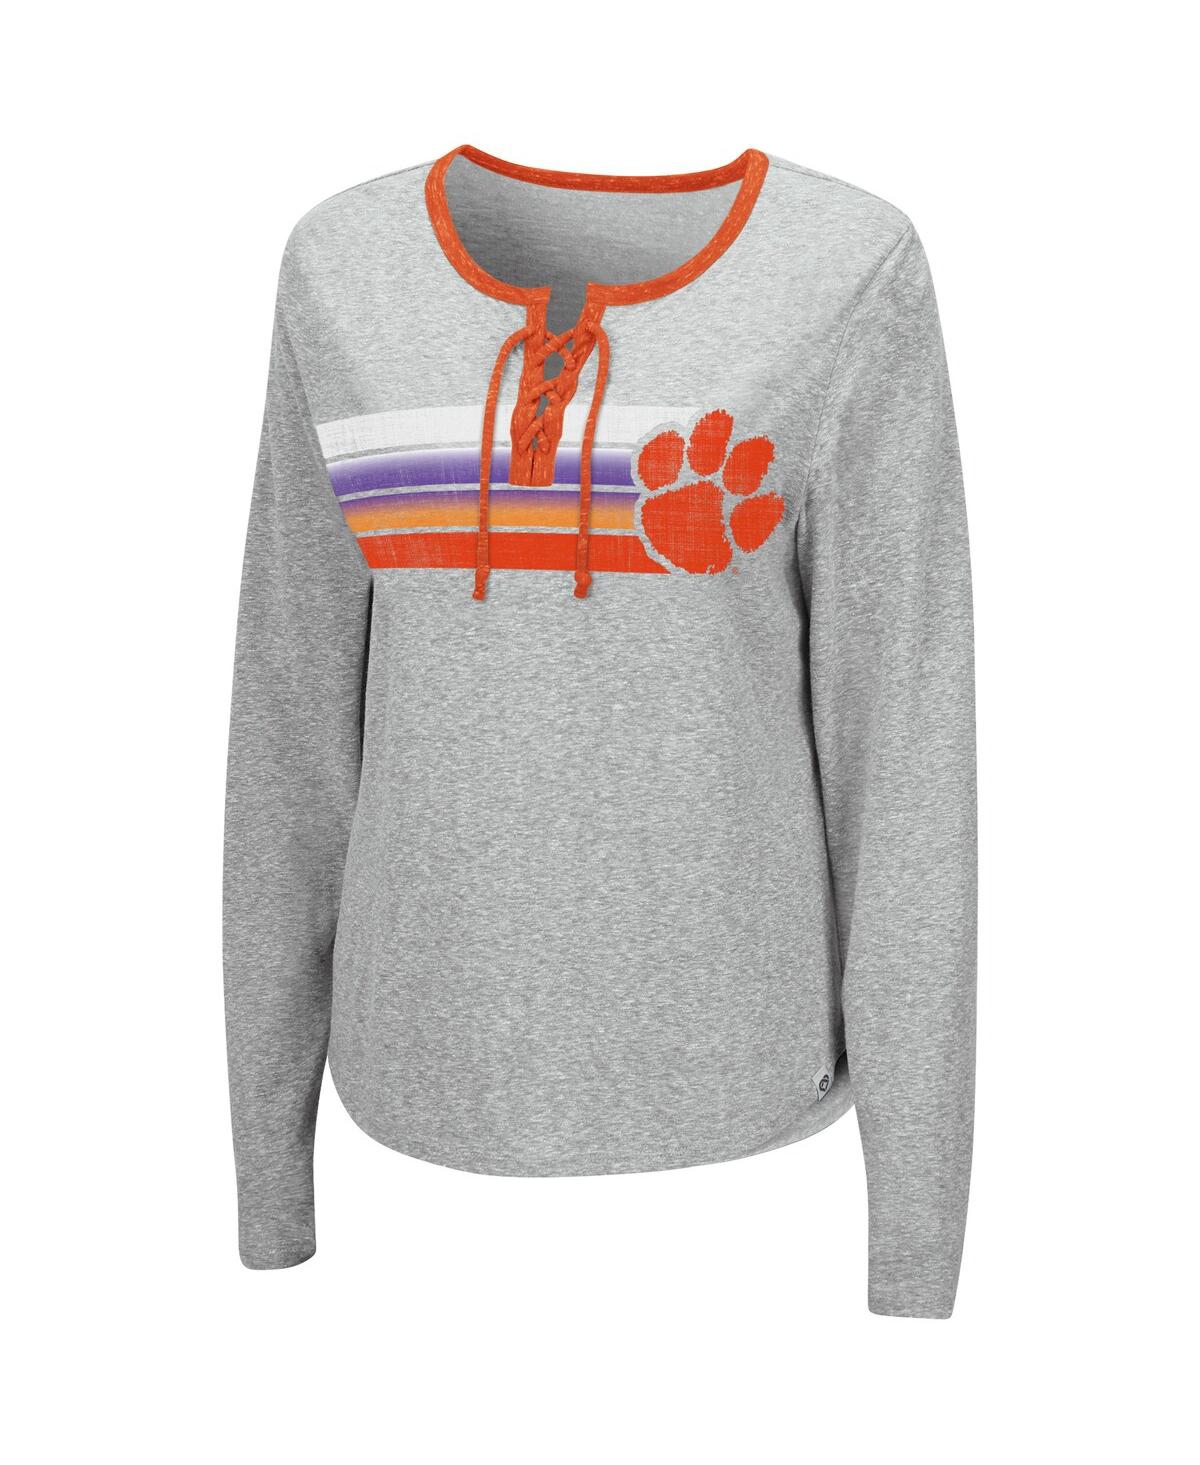 Shop Colosseum Women's  Heathered Gray Clemson Tigers Sundial Tri-blend Long Sleeve Lace-up T-shirt